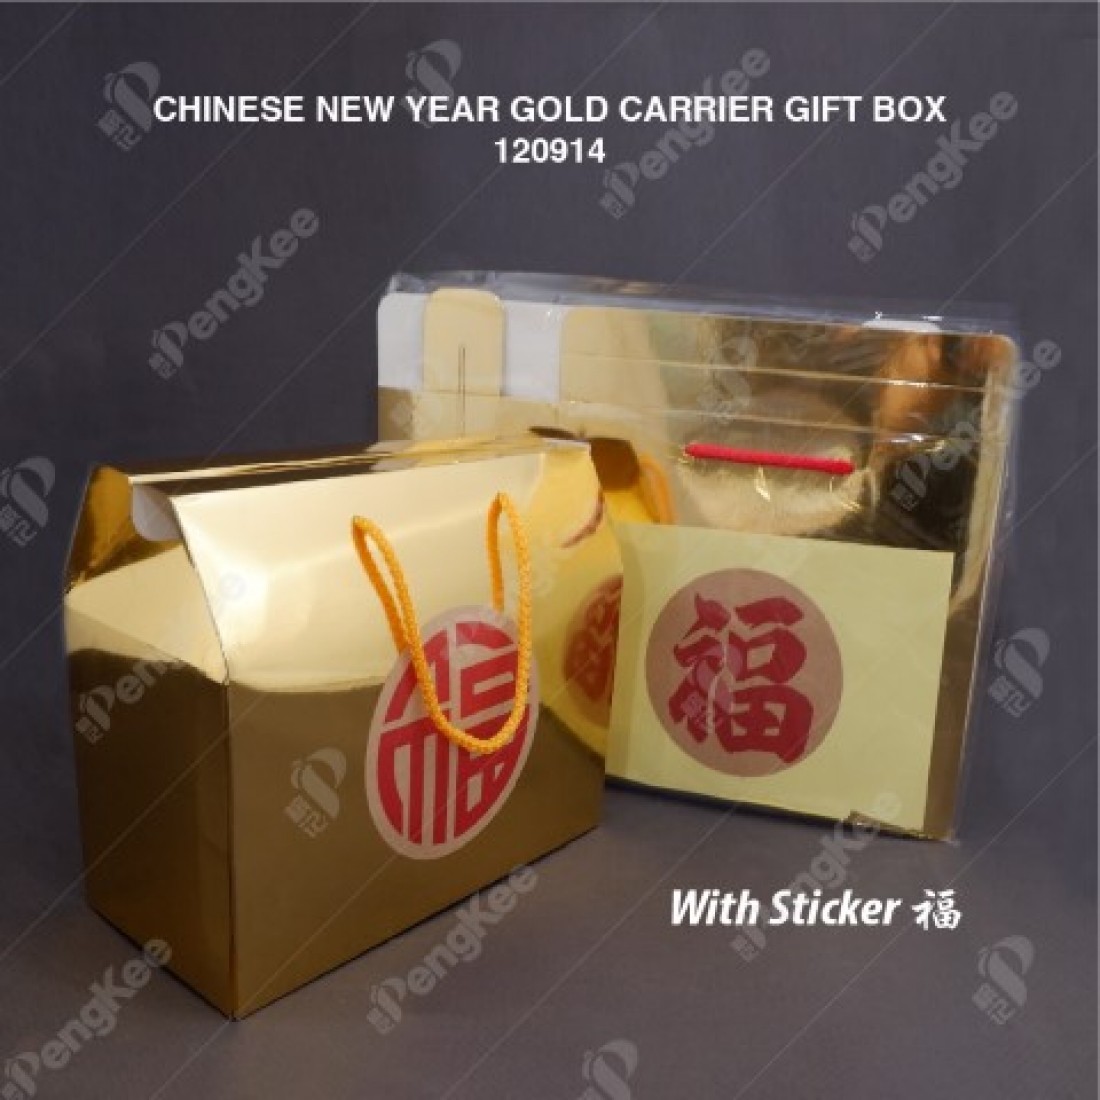 PAPER BAG GIFT BOX FOR CHINESE NEW YEAR GOLD CARRIER GIFT BOX  (PCS/PKT)